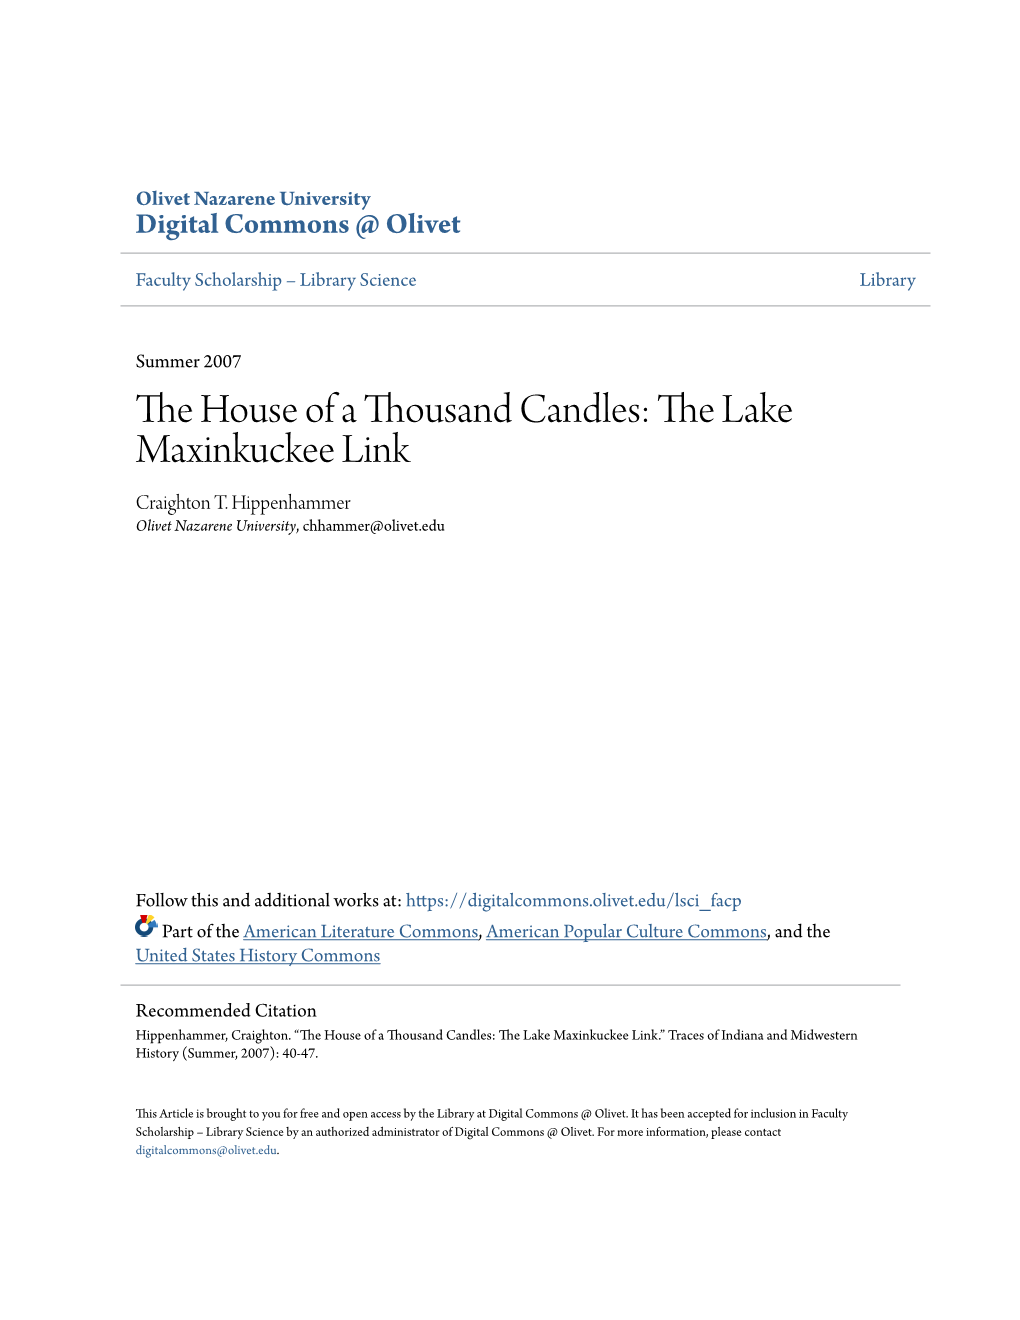 The House of a Thousand Candles: the Lake Maxinkuckee Link